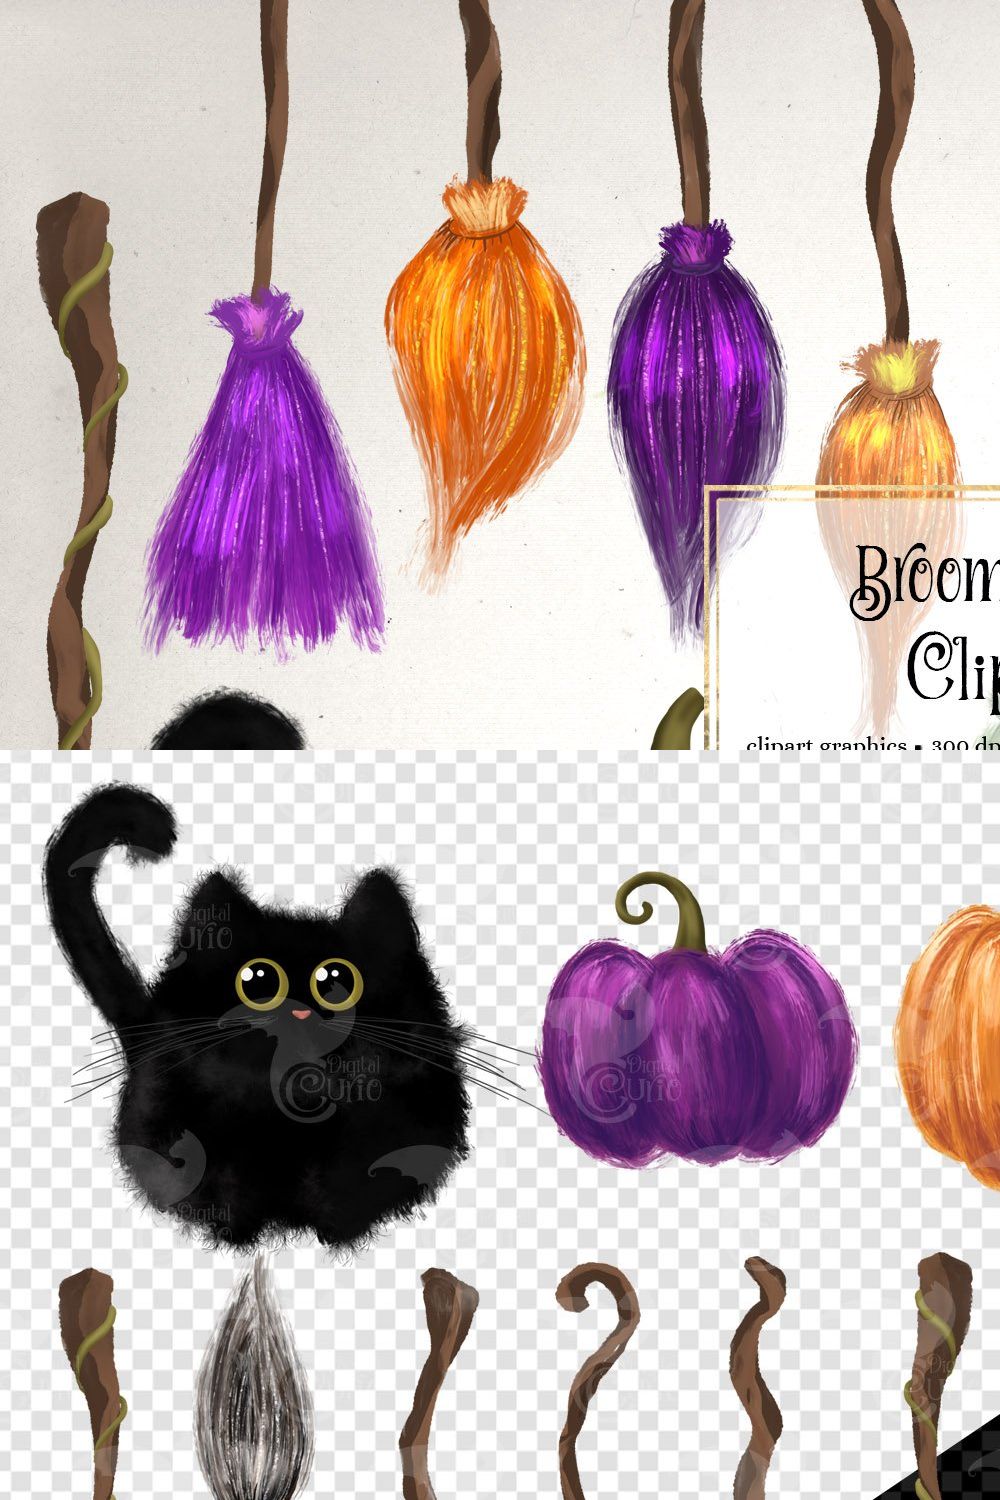 Broomstick Clipart pinterest preview image.